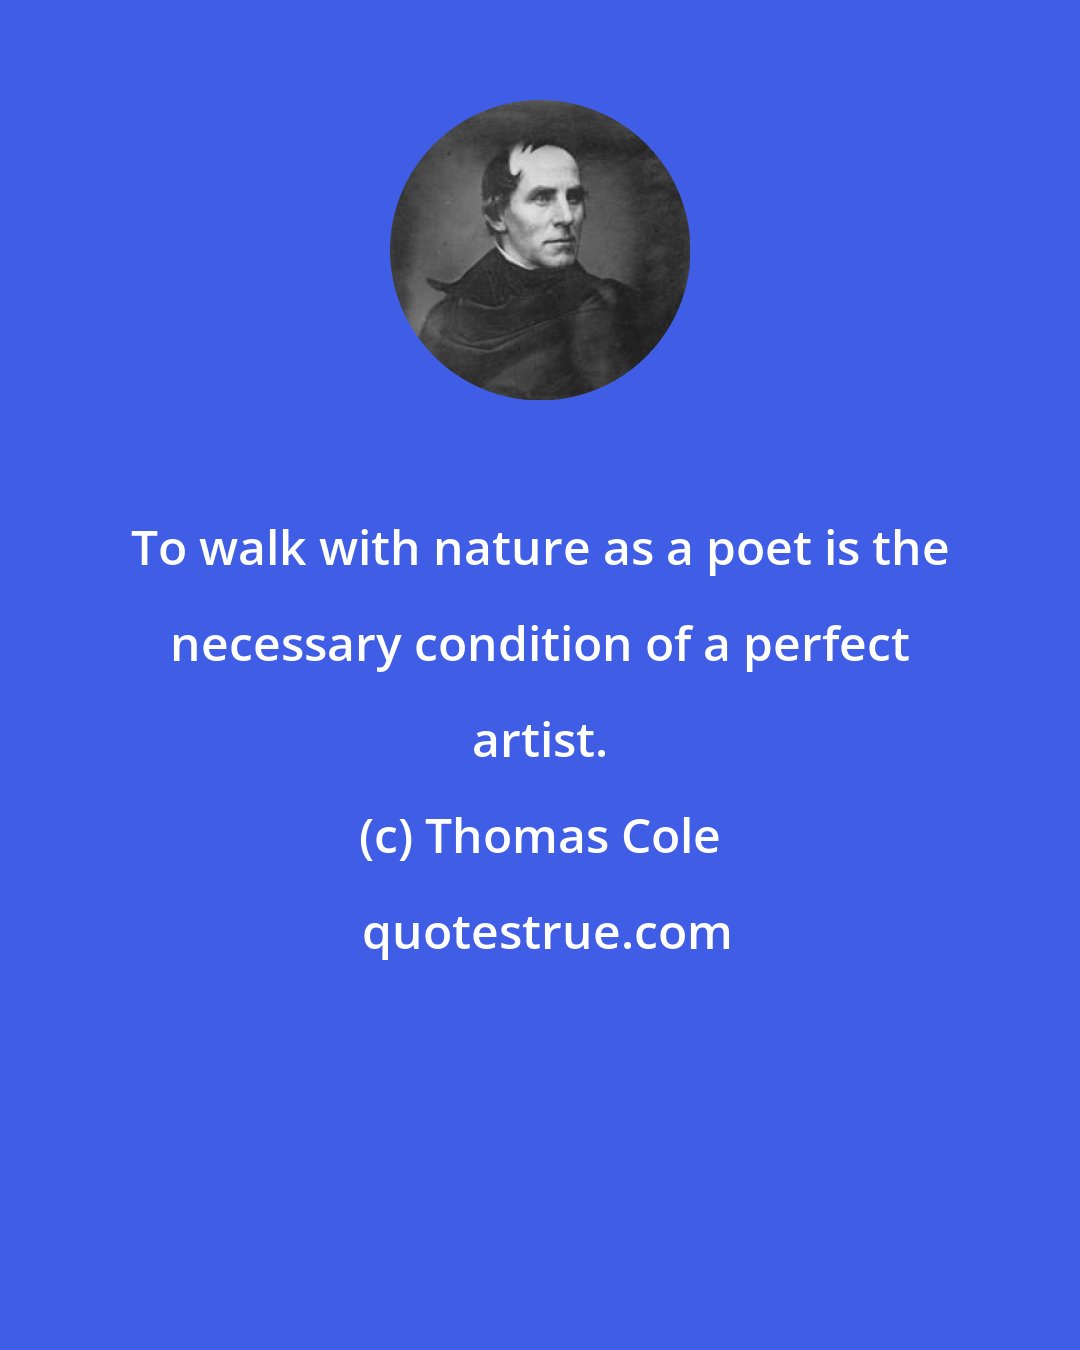 Thomas Cole: To walk with nature as a poet is the necessary condition of a perfect artist.